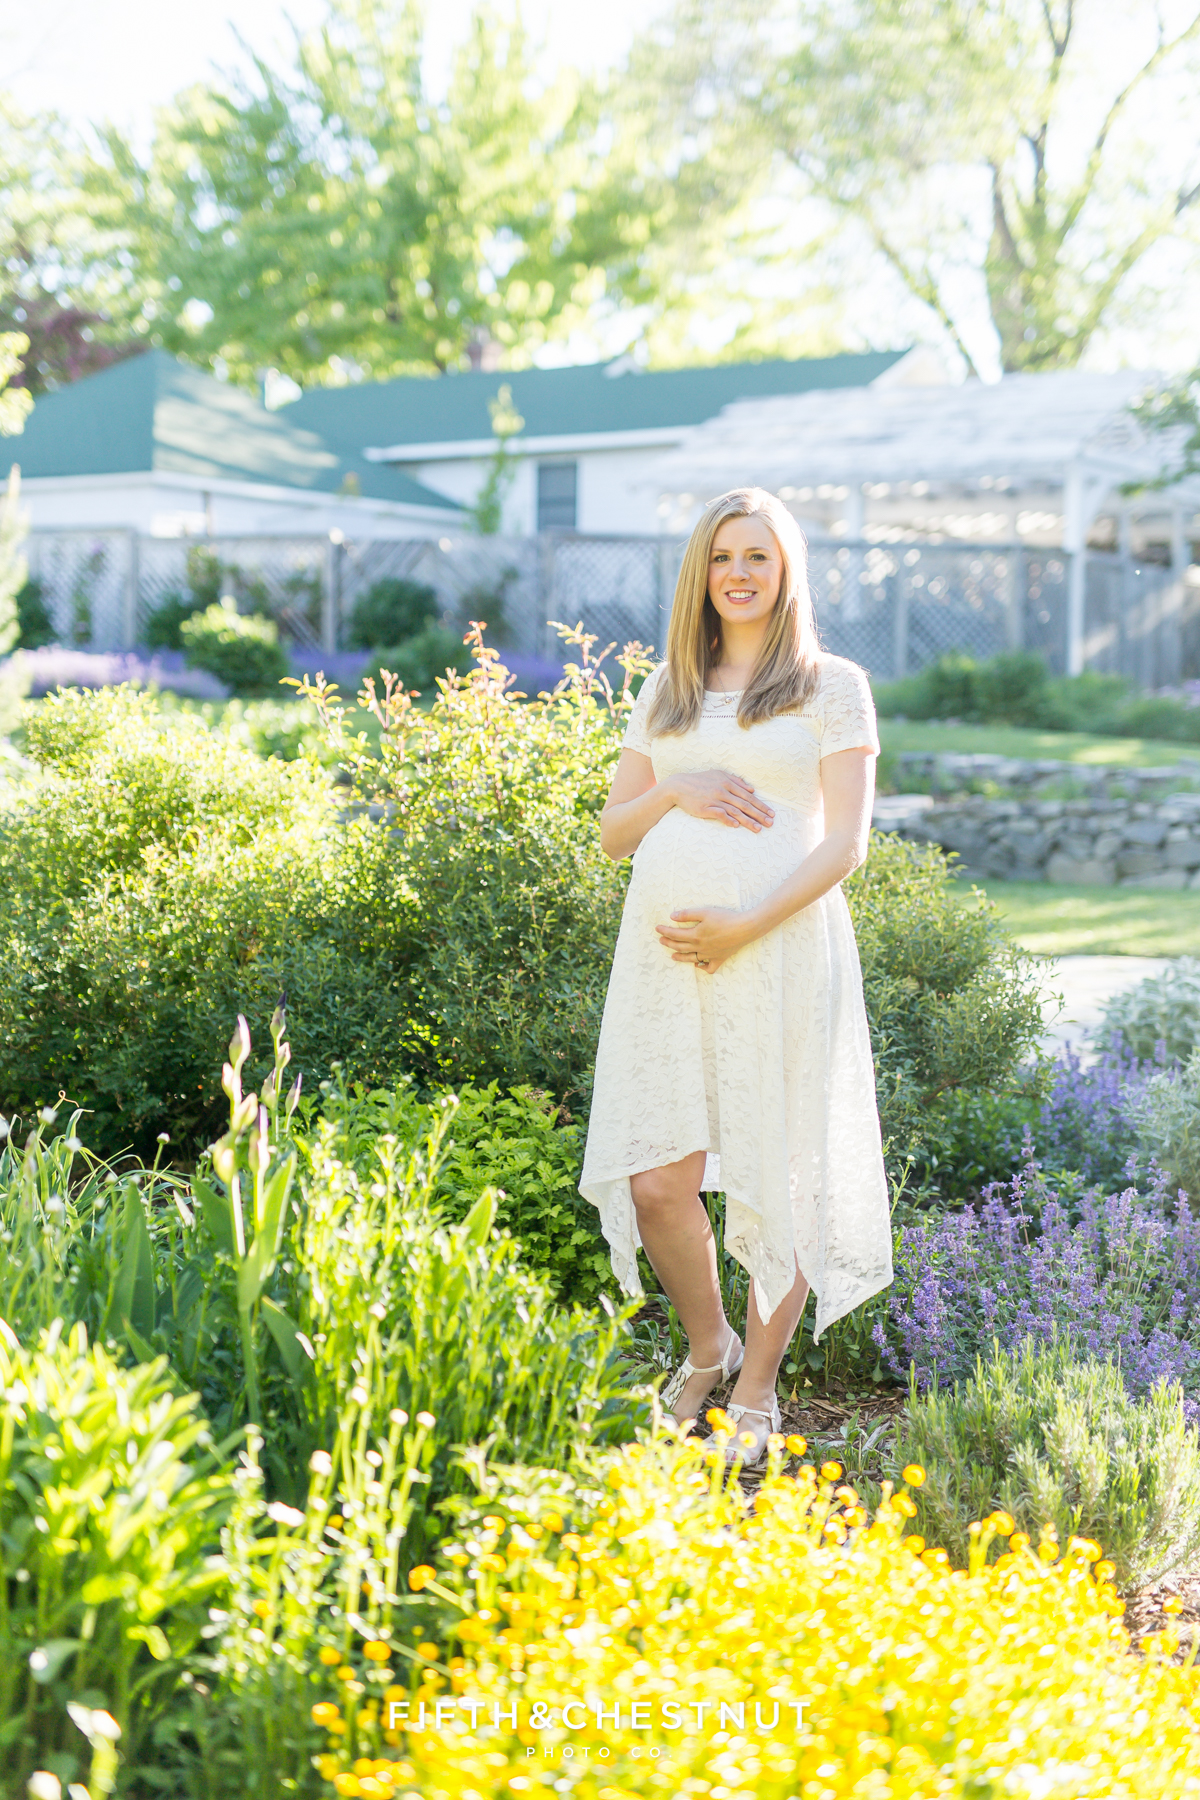 Spring Reno maternity portrait of pregnant woman standing in a beautiful bed of flowers